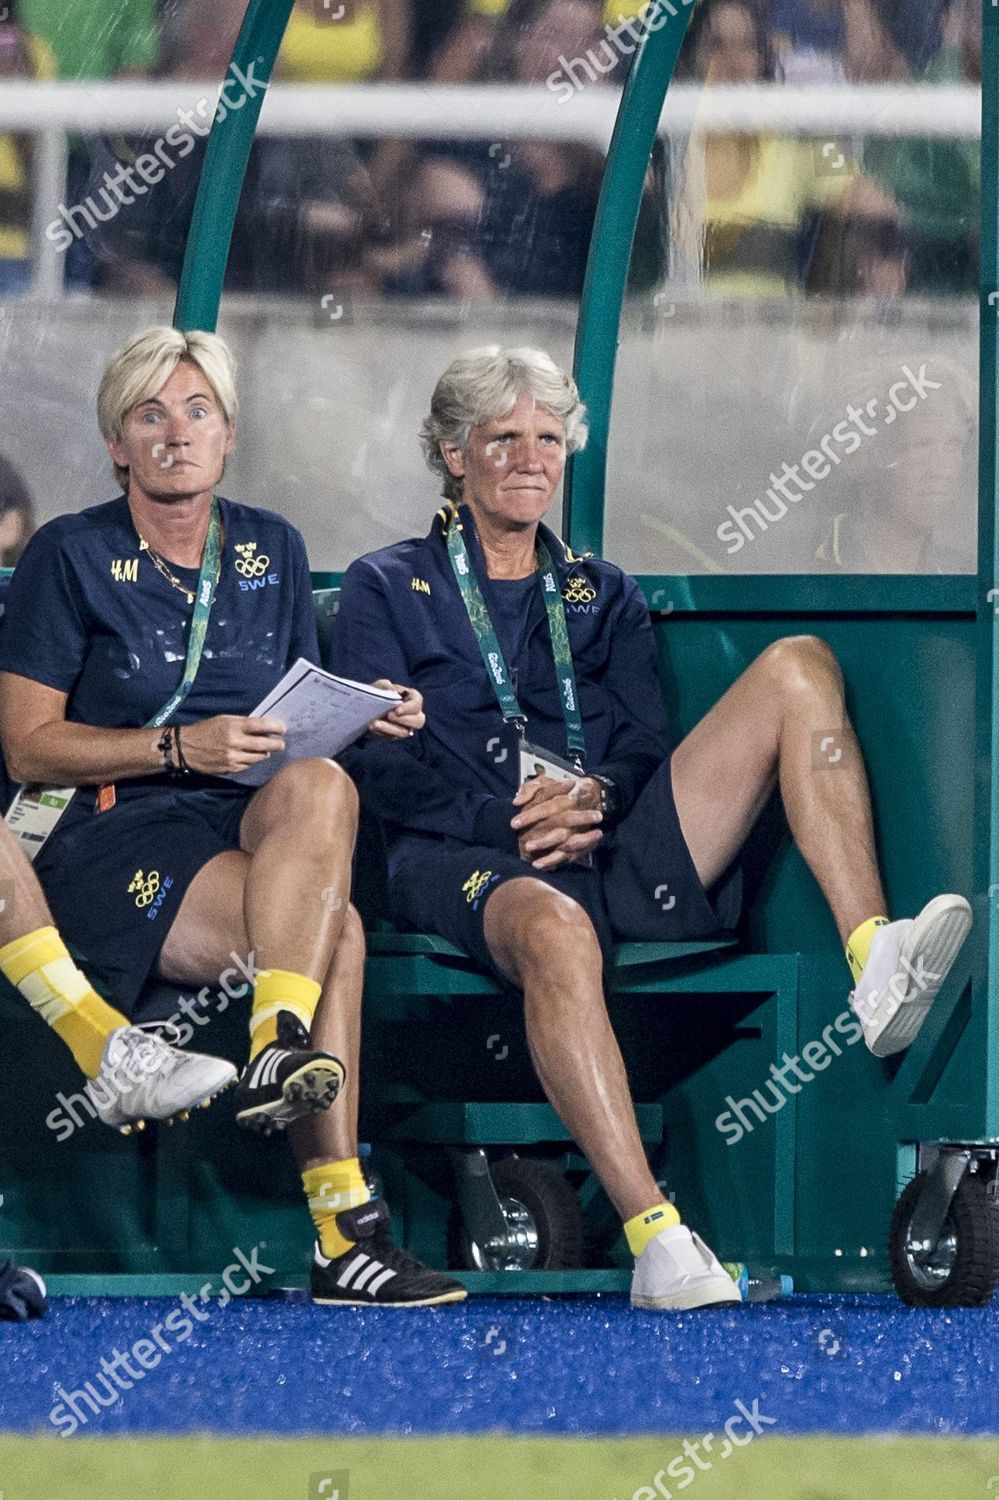 Brazil V Sweden Lilie Persson Pia Sundhage Editorial Stock Photo Stock Image Shutterstock